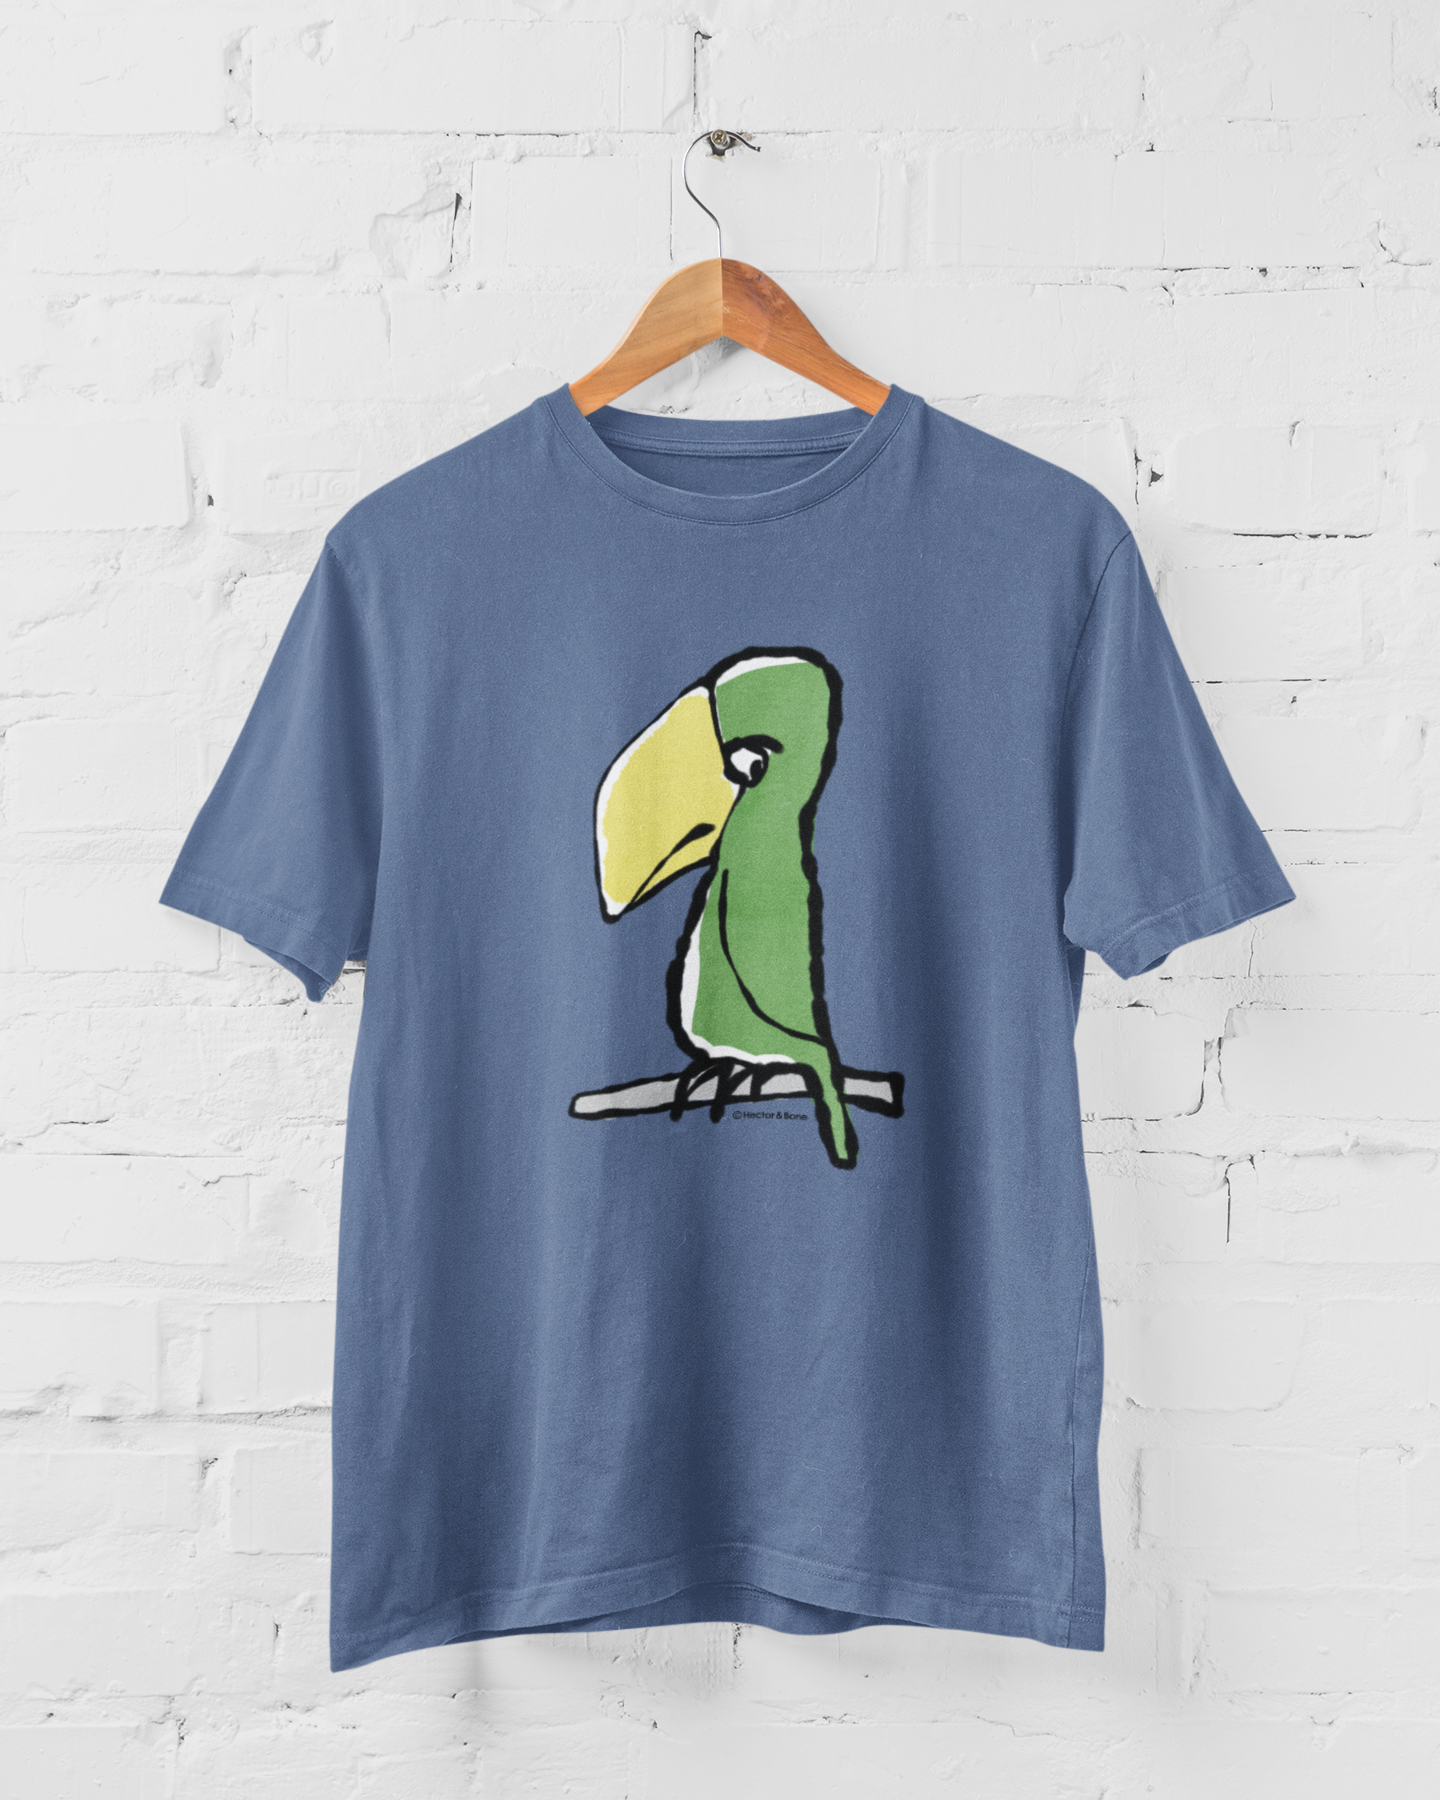 Peter Parrot T-shirt - Bright Blue Unisex Hector and Bone T-shirts with cute printed illustration